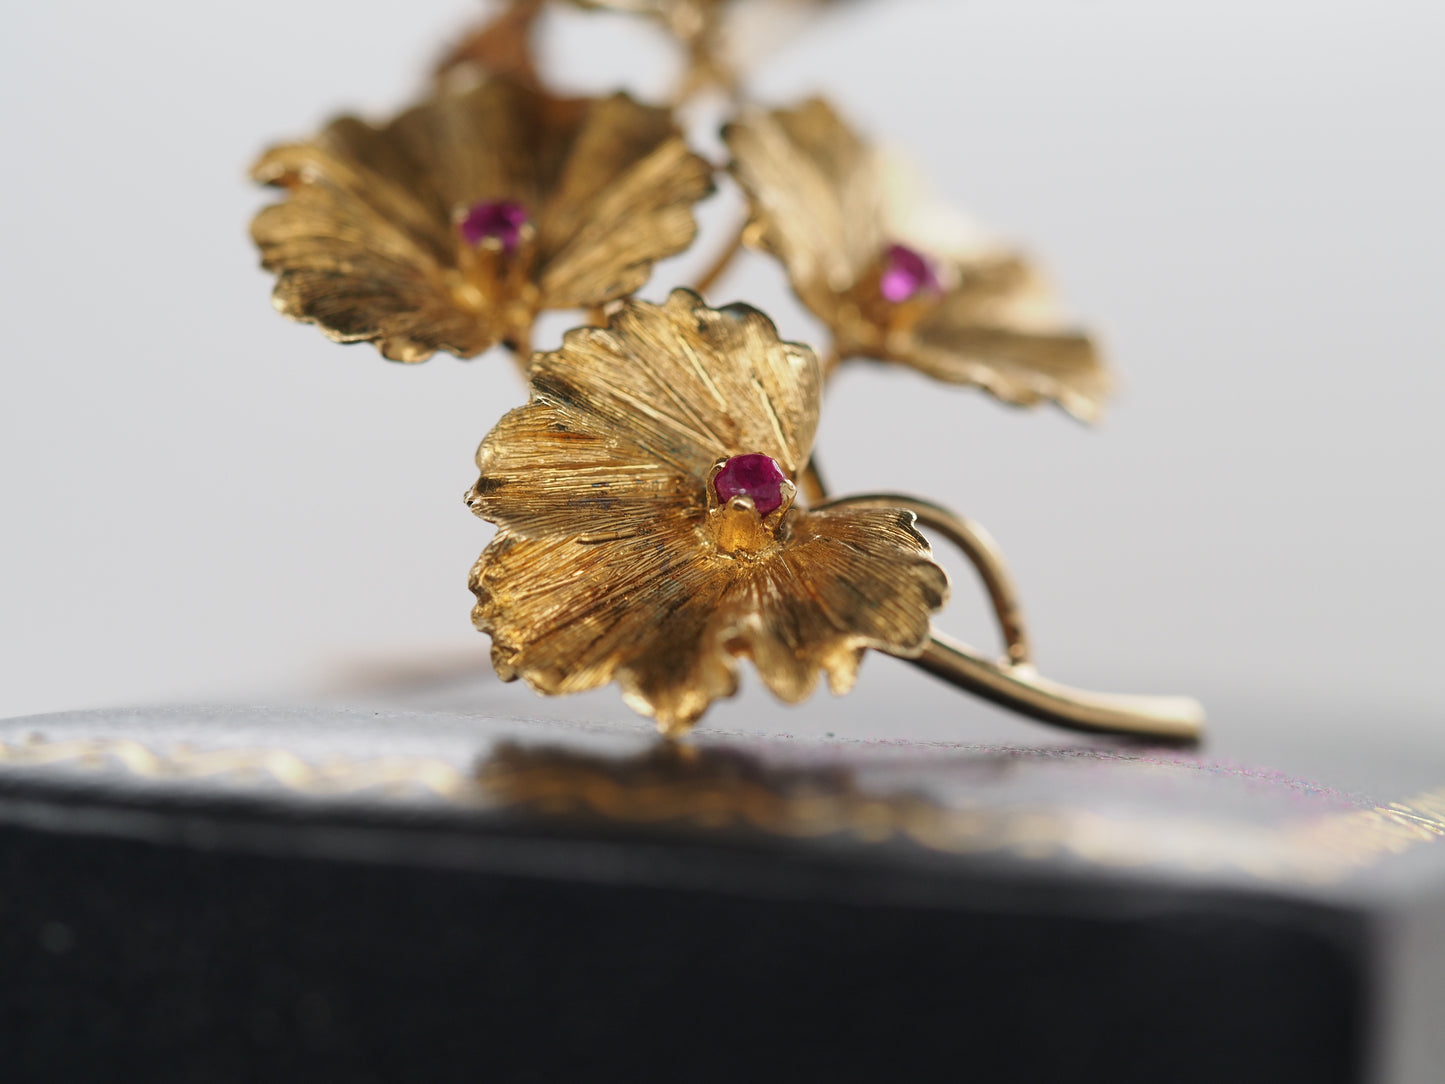 Smithworks Estate Jewelry 18K Yellow Gold Flower Pin with Turquoise Petals  and Rubies 253-9 - Smithworks Fine Jewelry